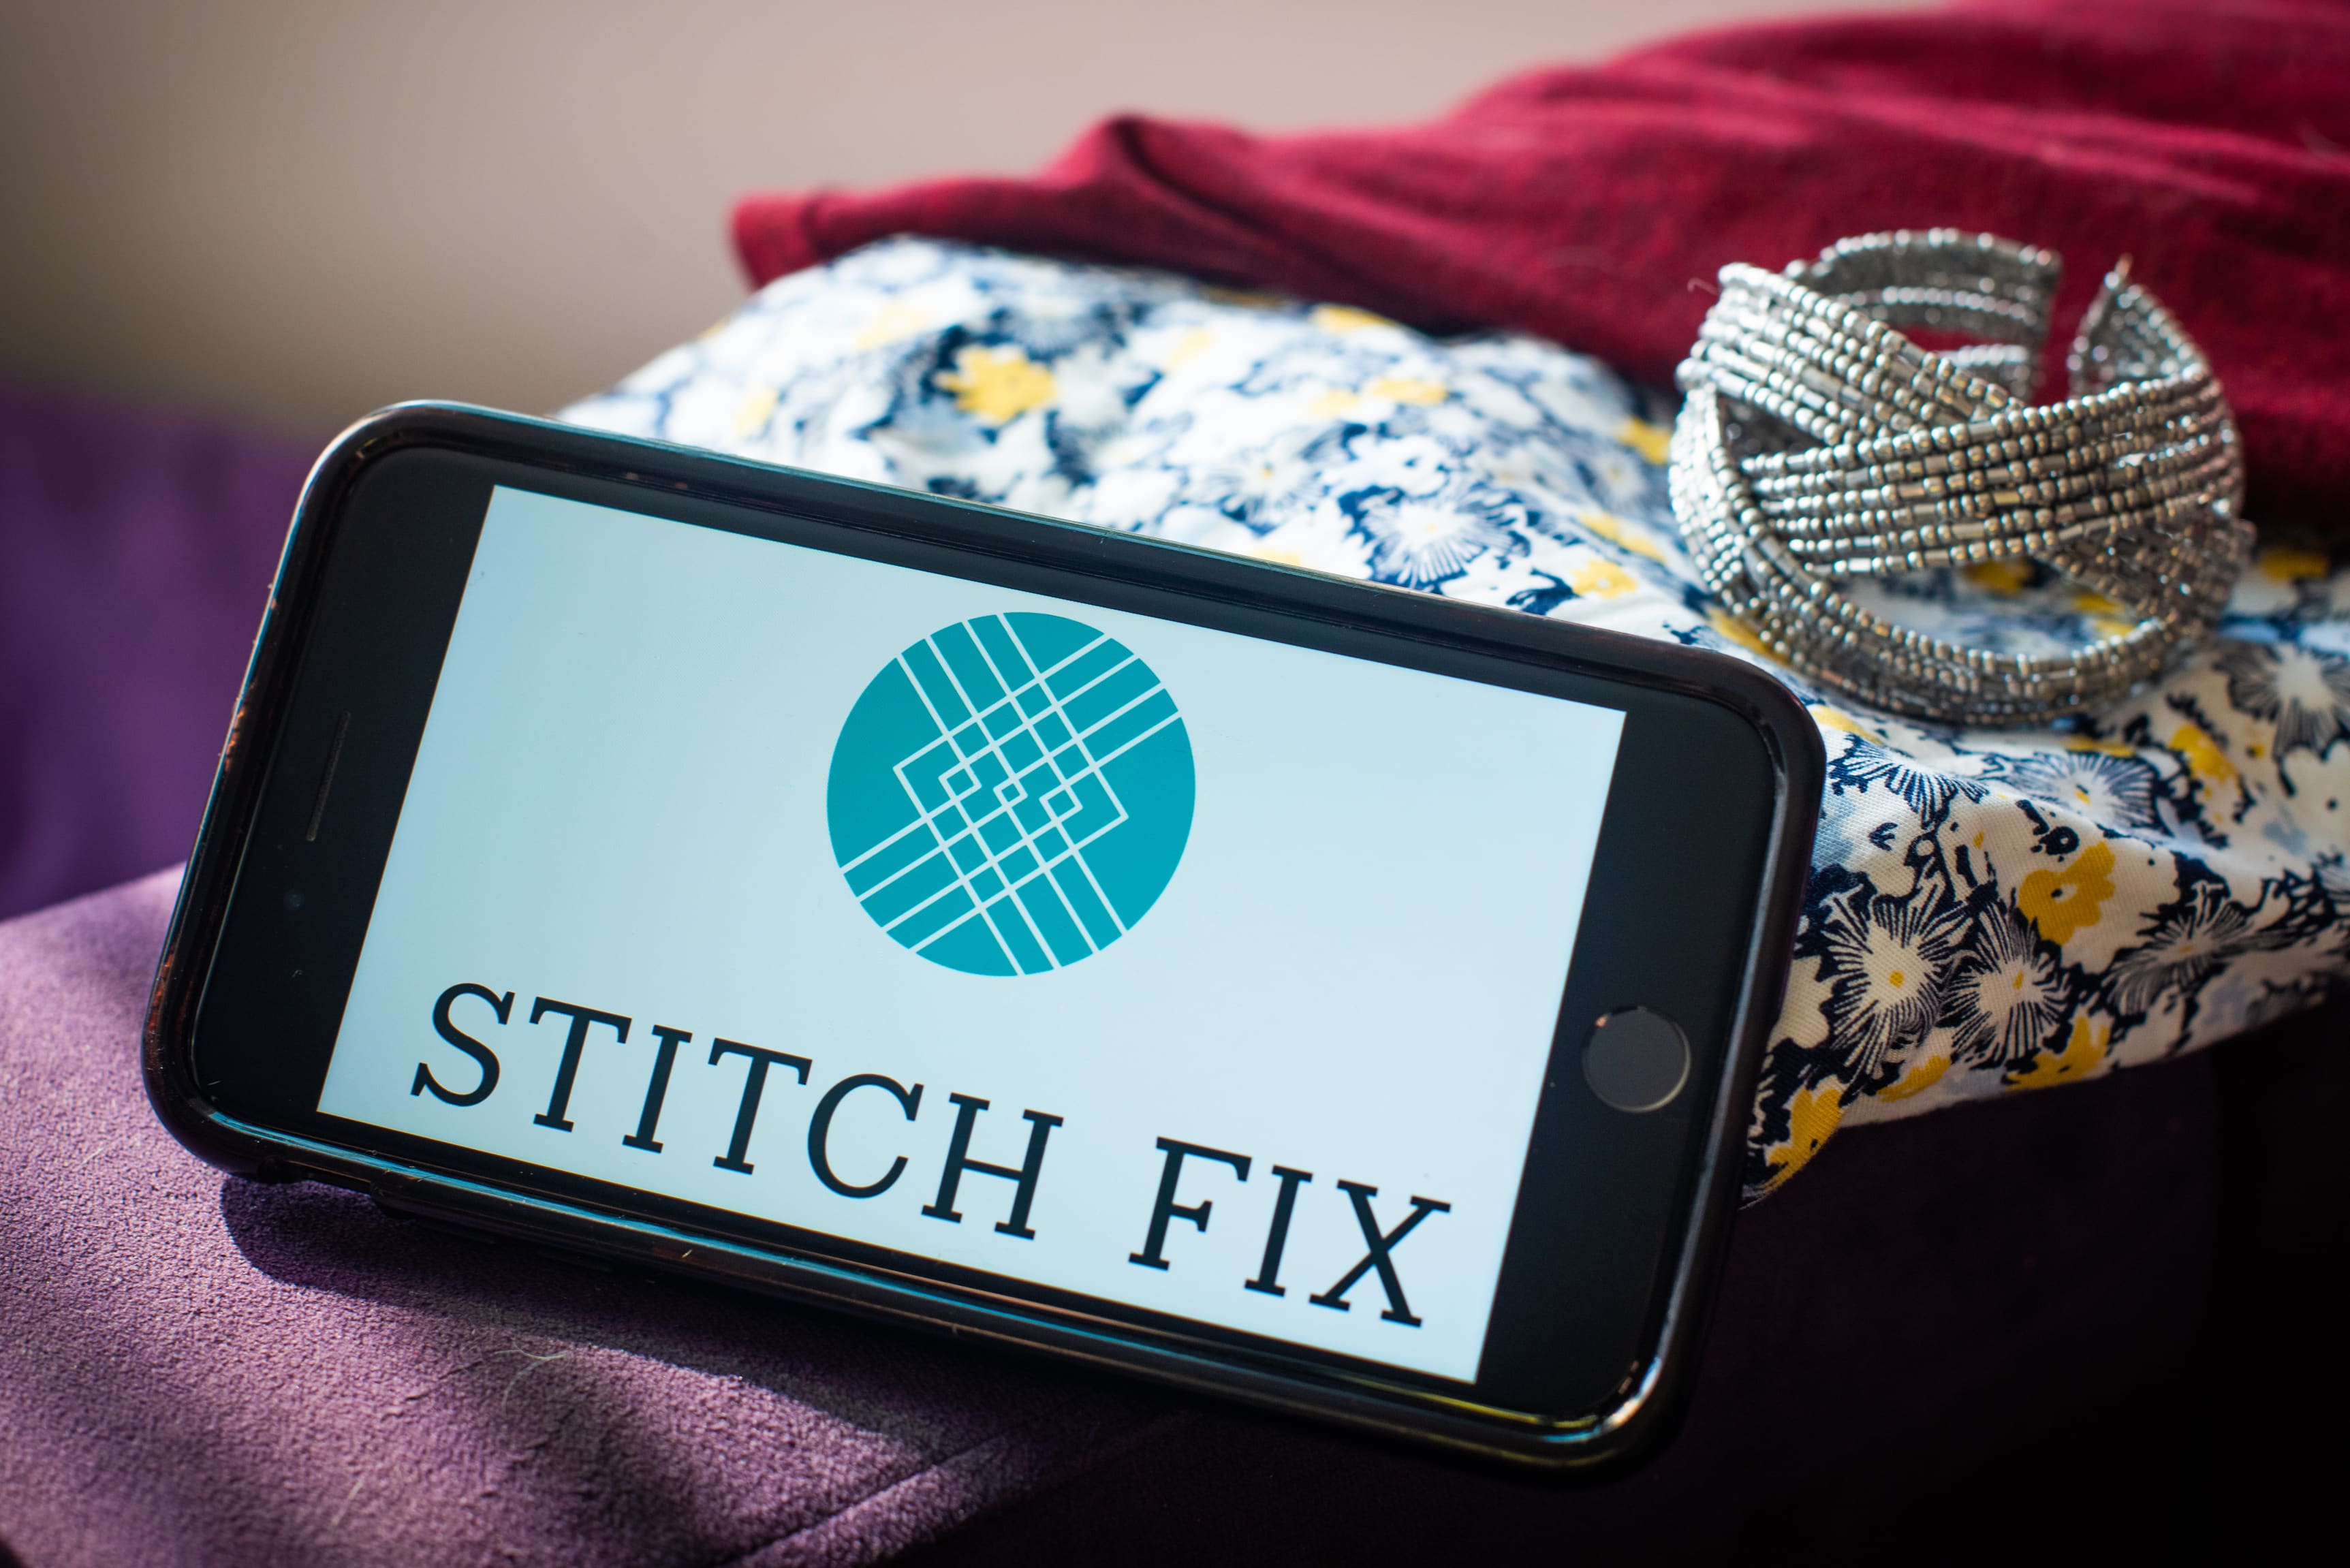 Stitch Fix stock touches all-time low as styling service’s future growth is in doubt